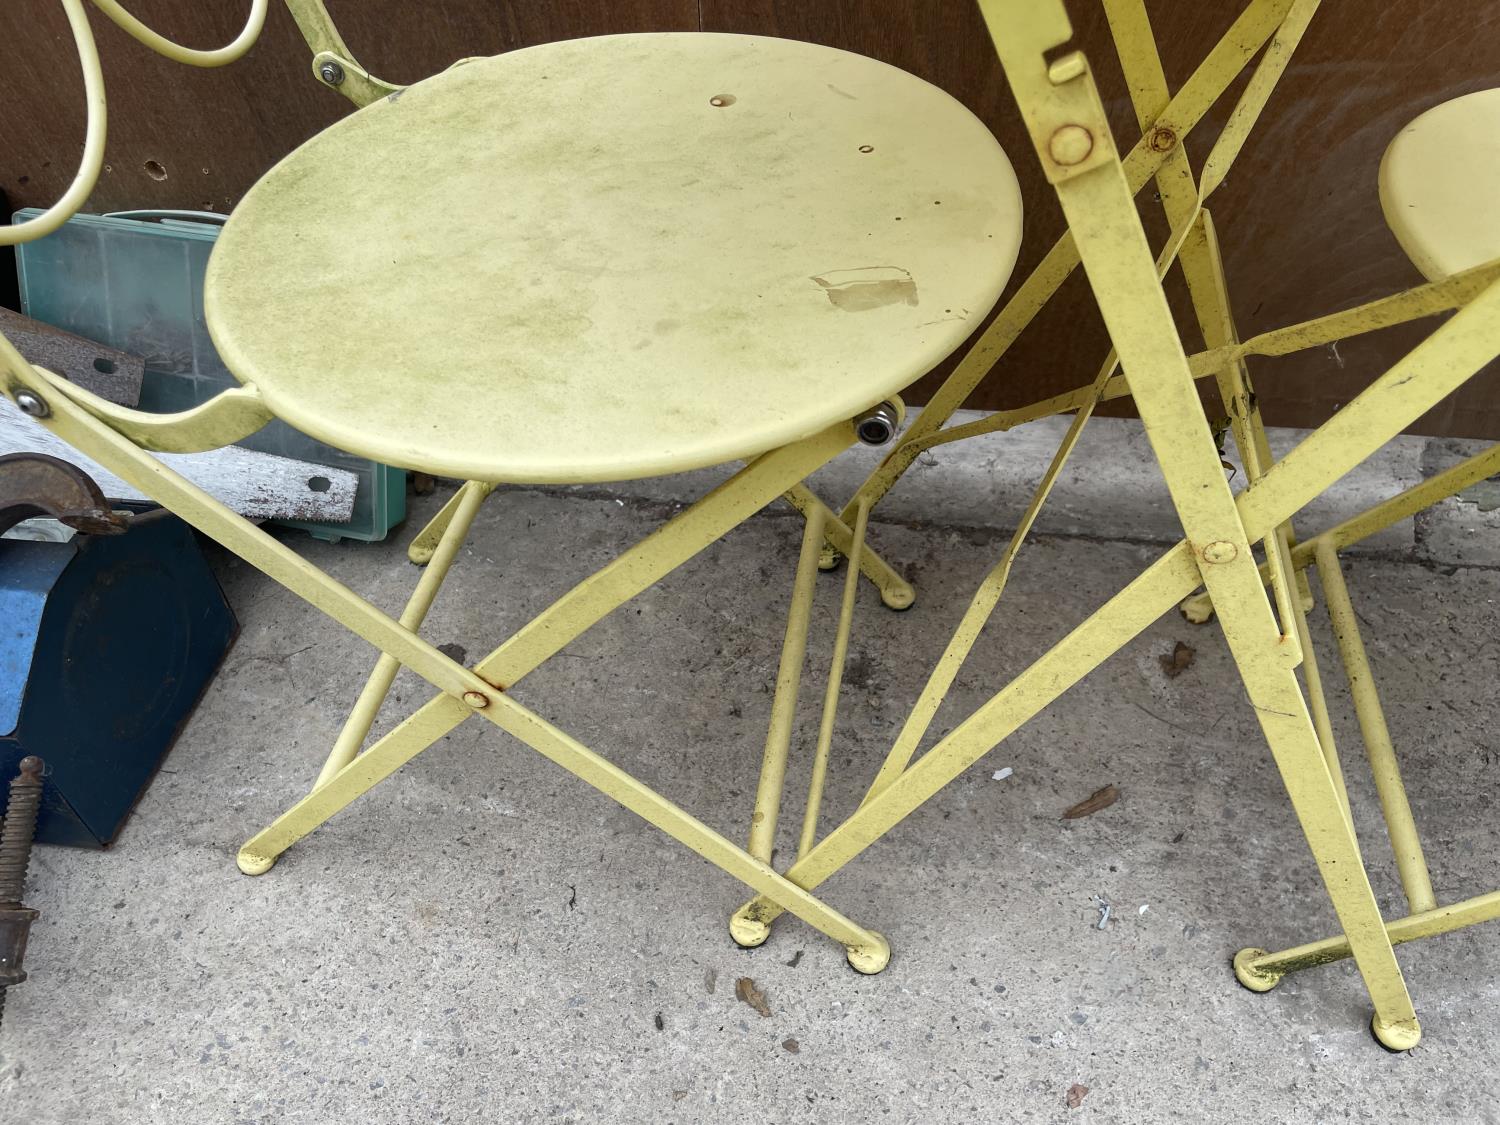 A FOLDING METAL BISTRO SET COMPRISING OF A ROUND TABLE AND TWO CHAIRS - Image 3 of 3